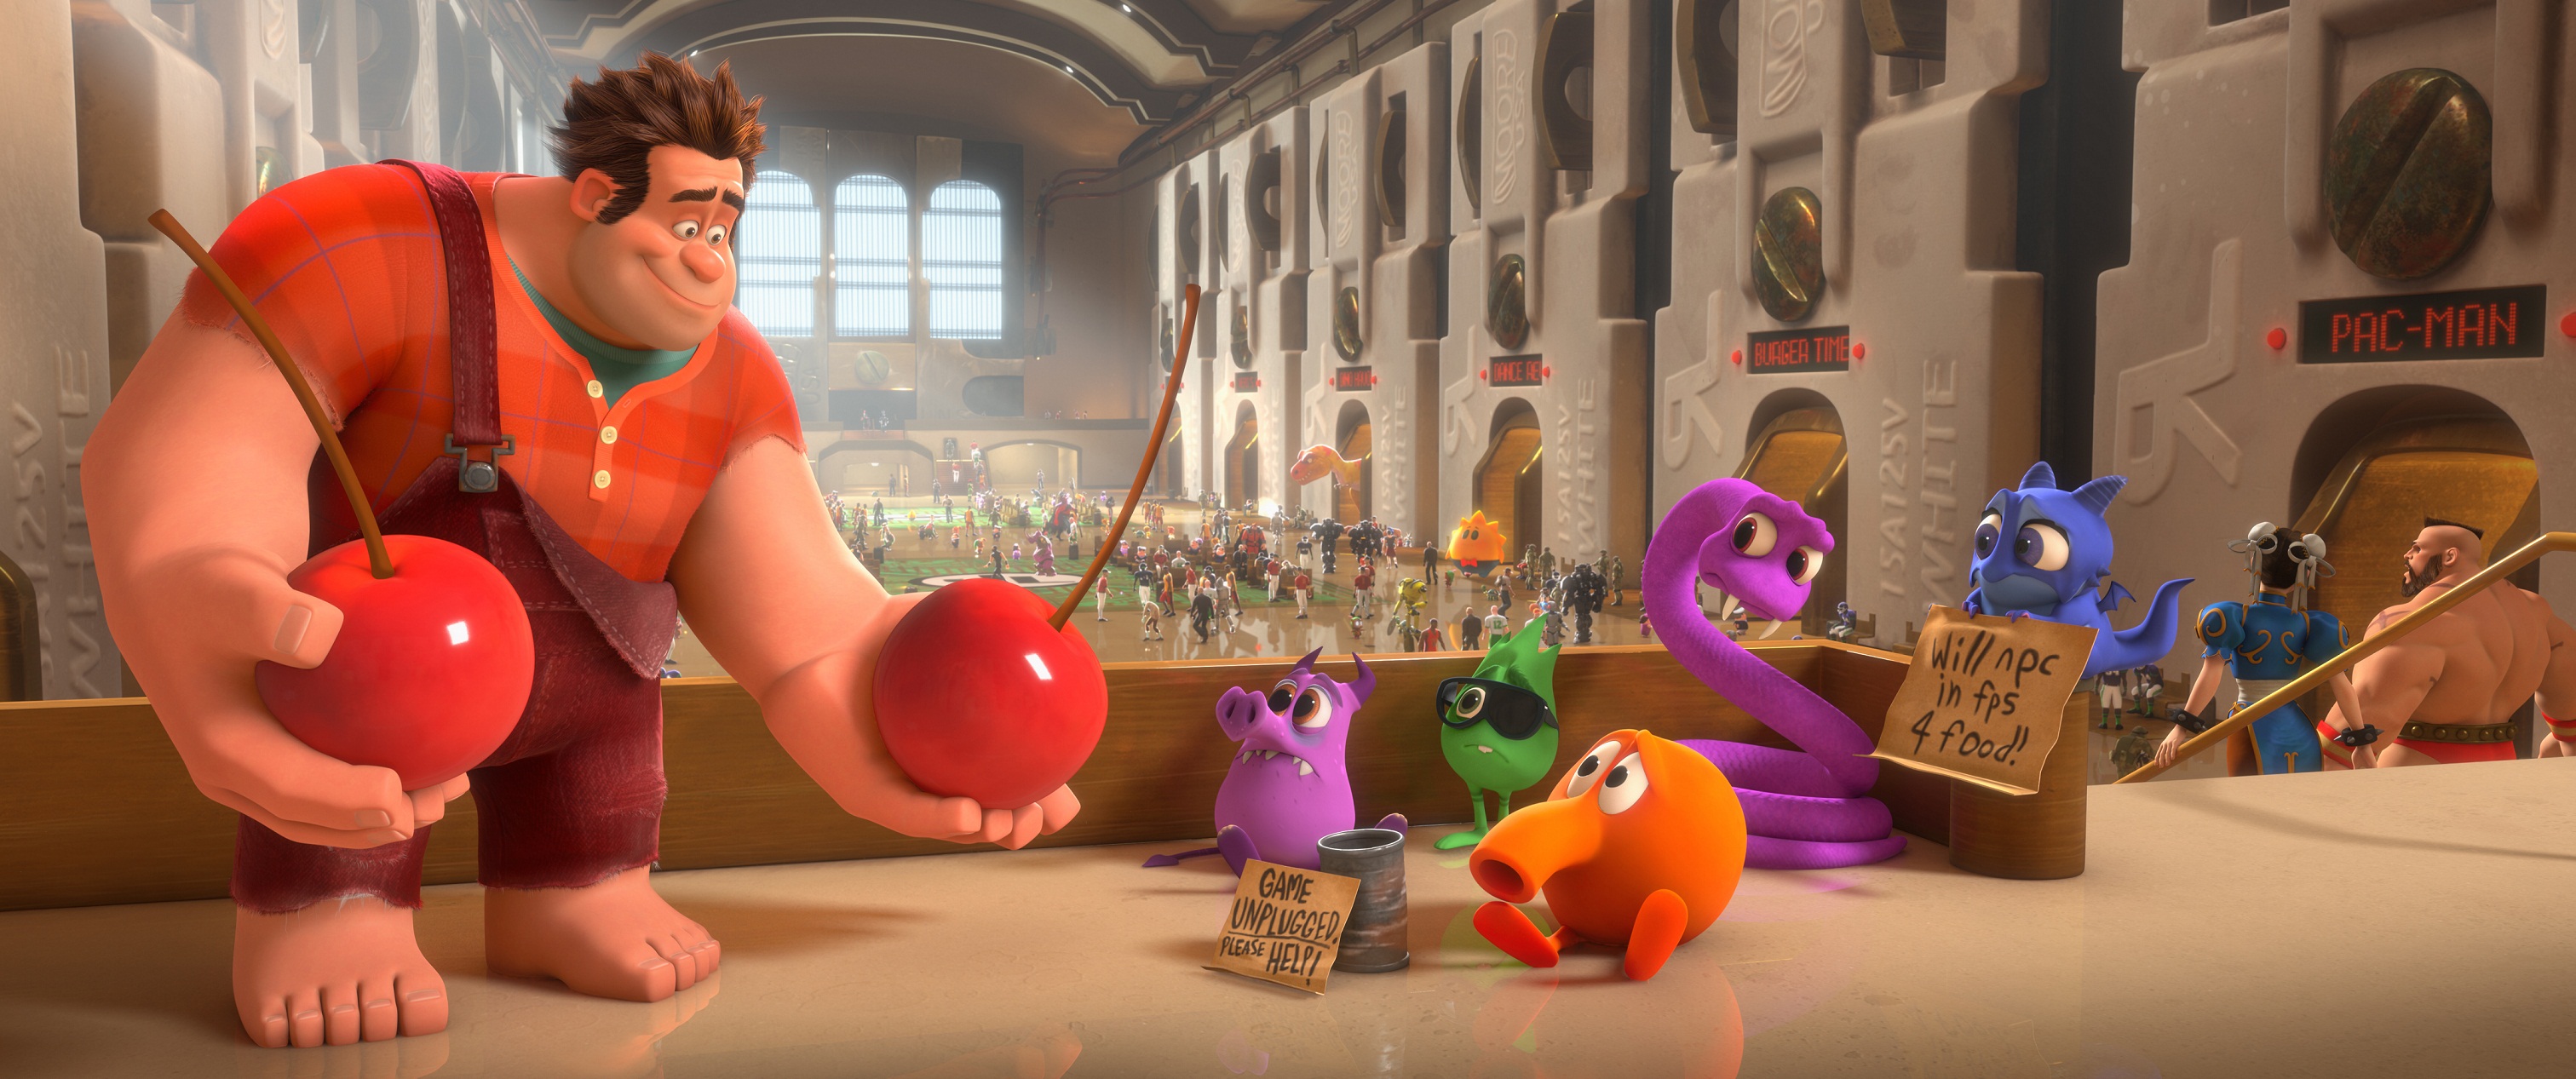 Four Images Power-Up For Disney's Videogame-Inspired 'Wreck-It Ralph'